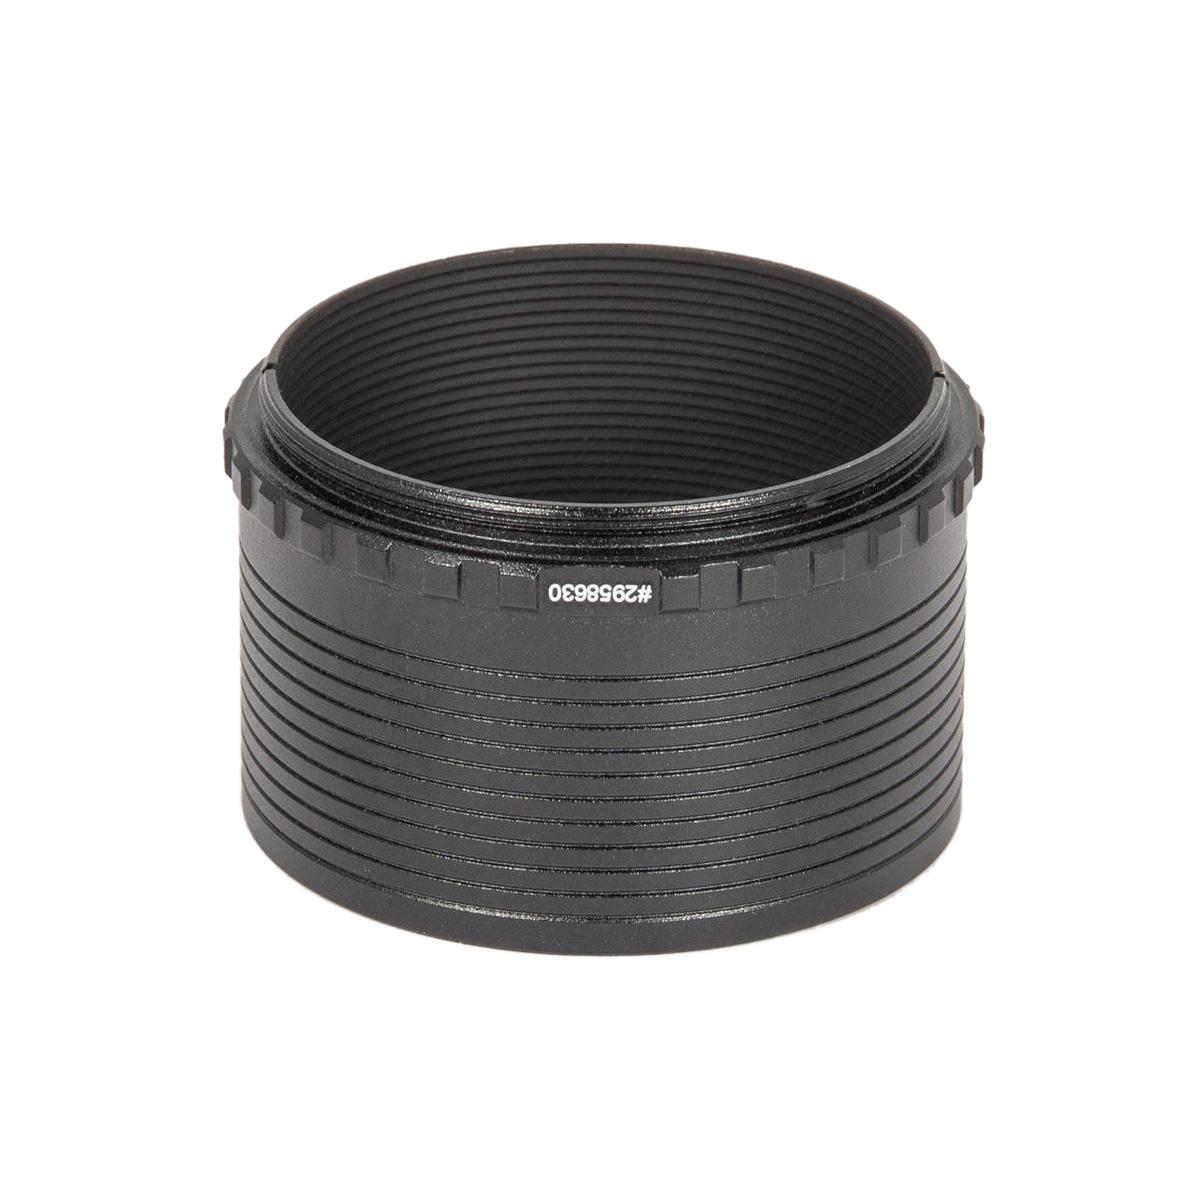 Baader M48 extension tube 30mm